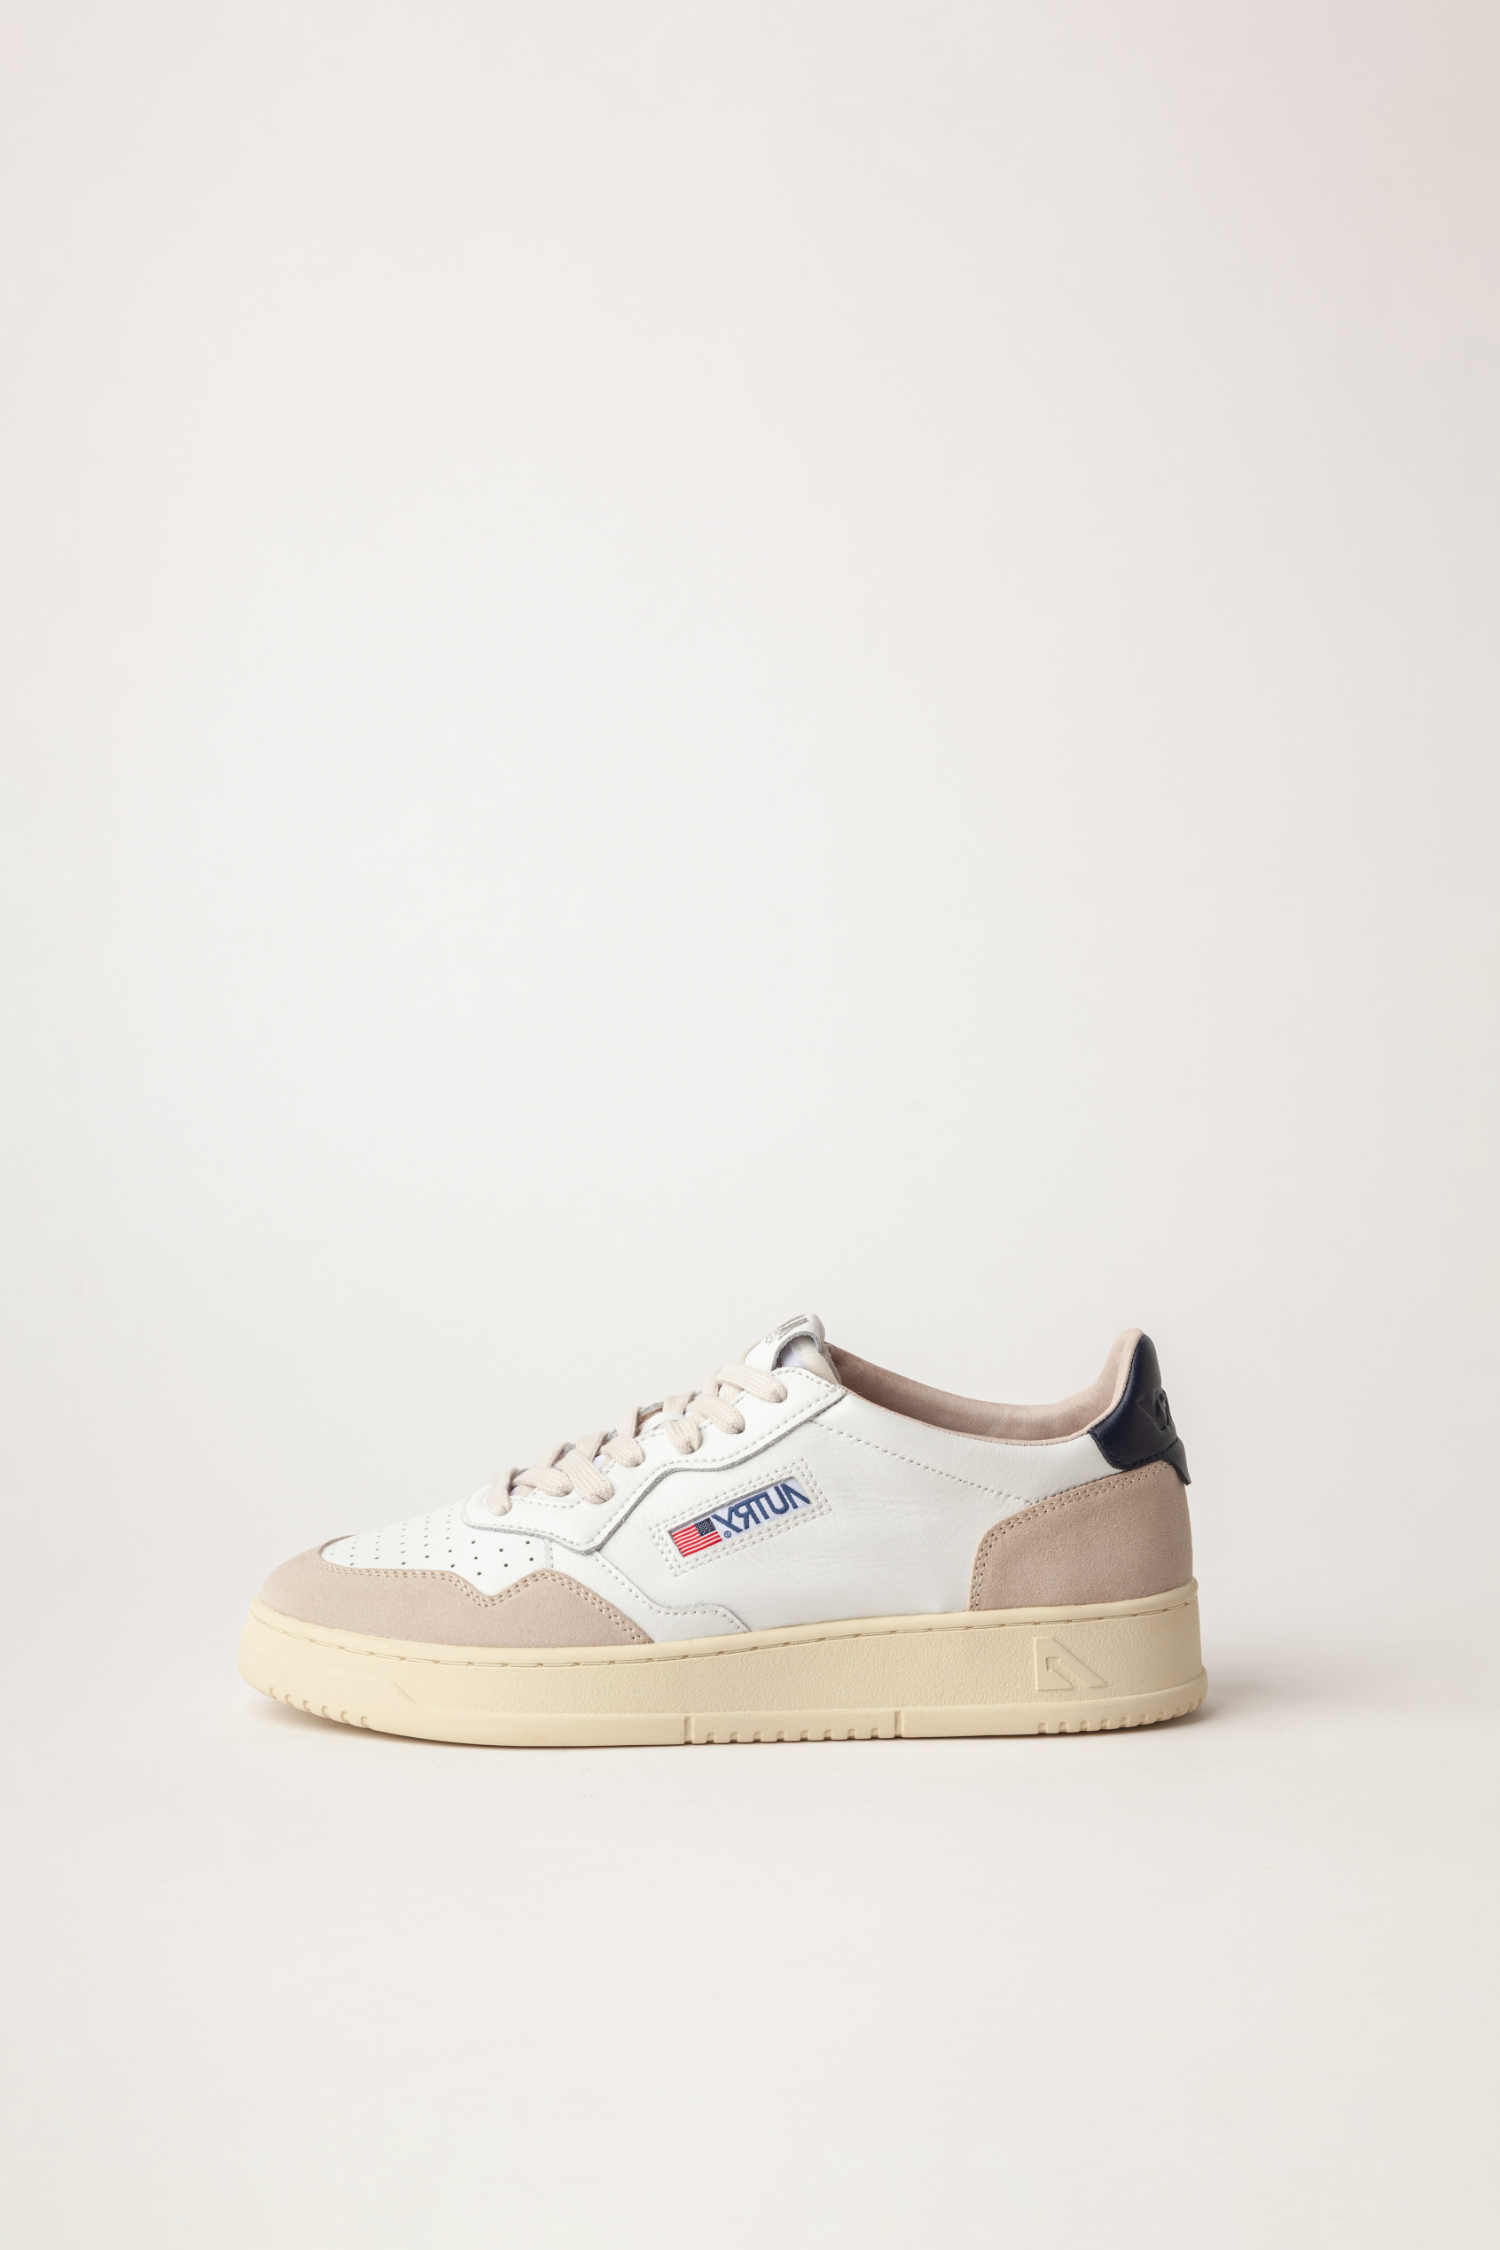 AULM-LS28 - MEDALIST LOW SNEAKERS IN SUEDE AND LEATHER WHITE AND BLUE